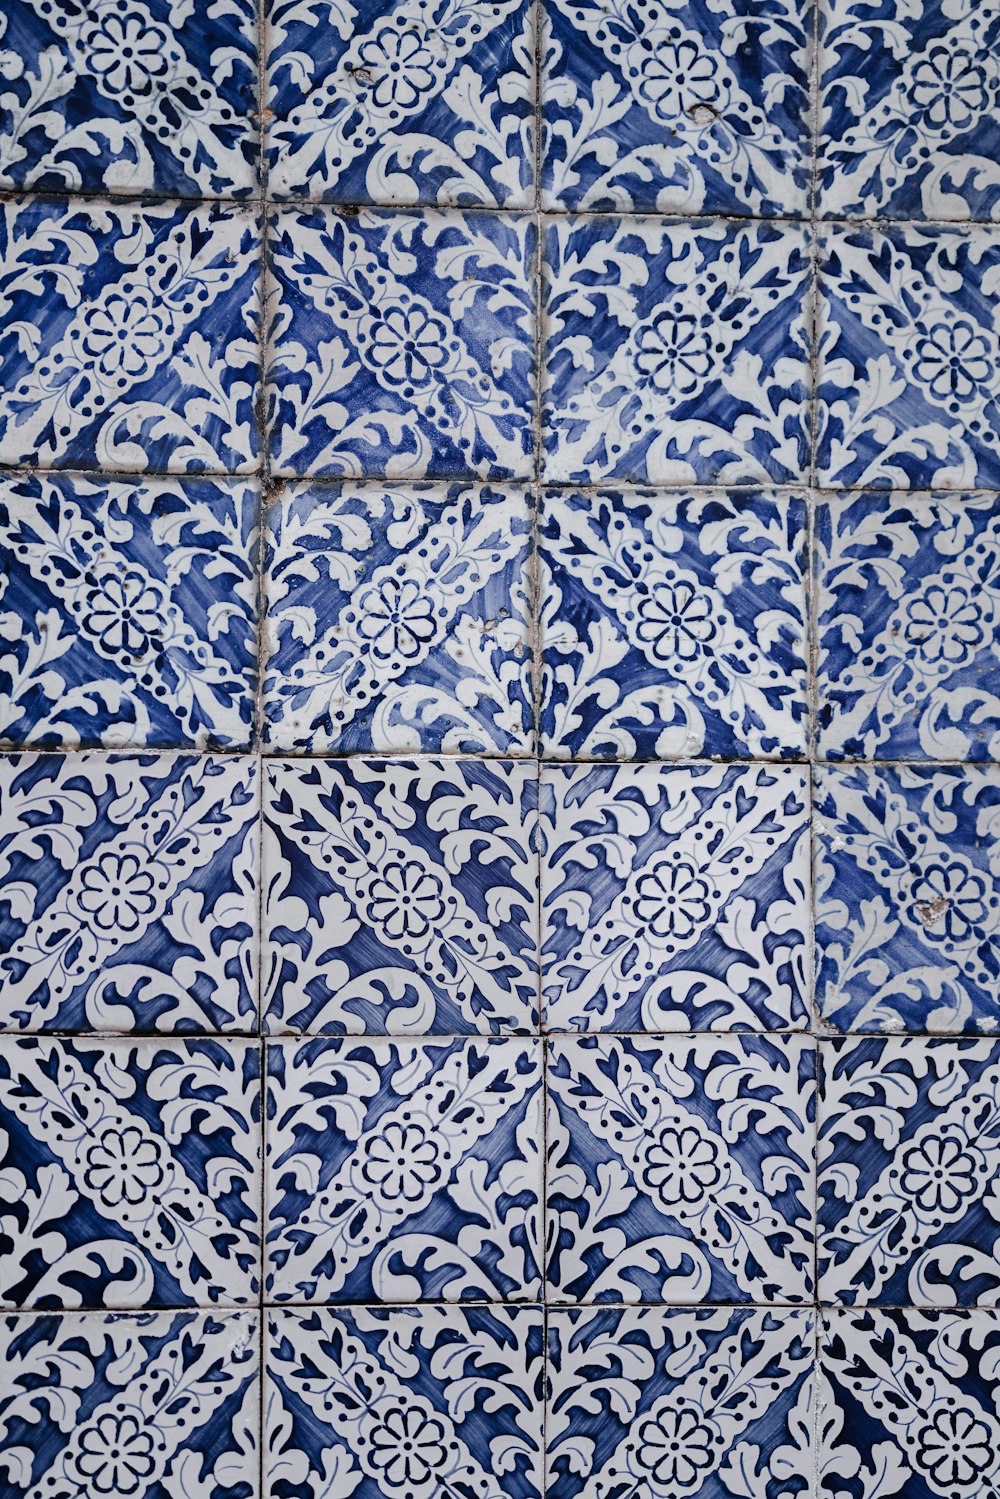 white and blue floral tiles